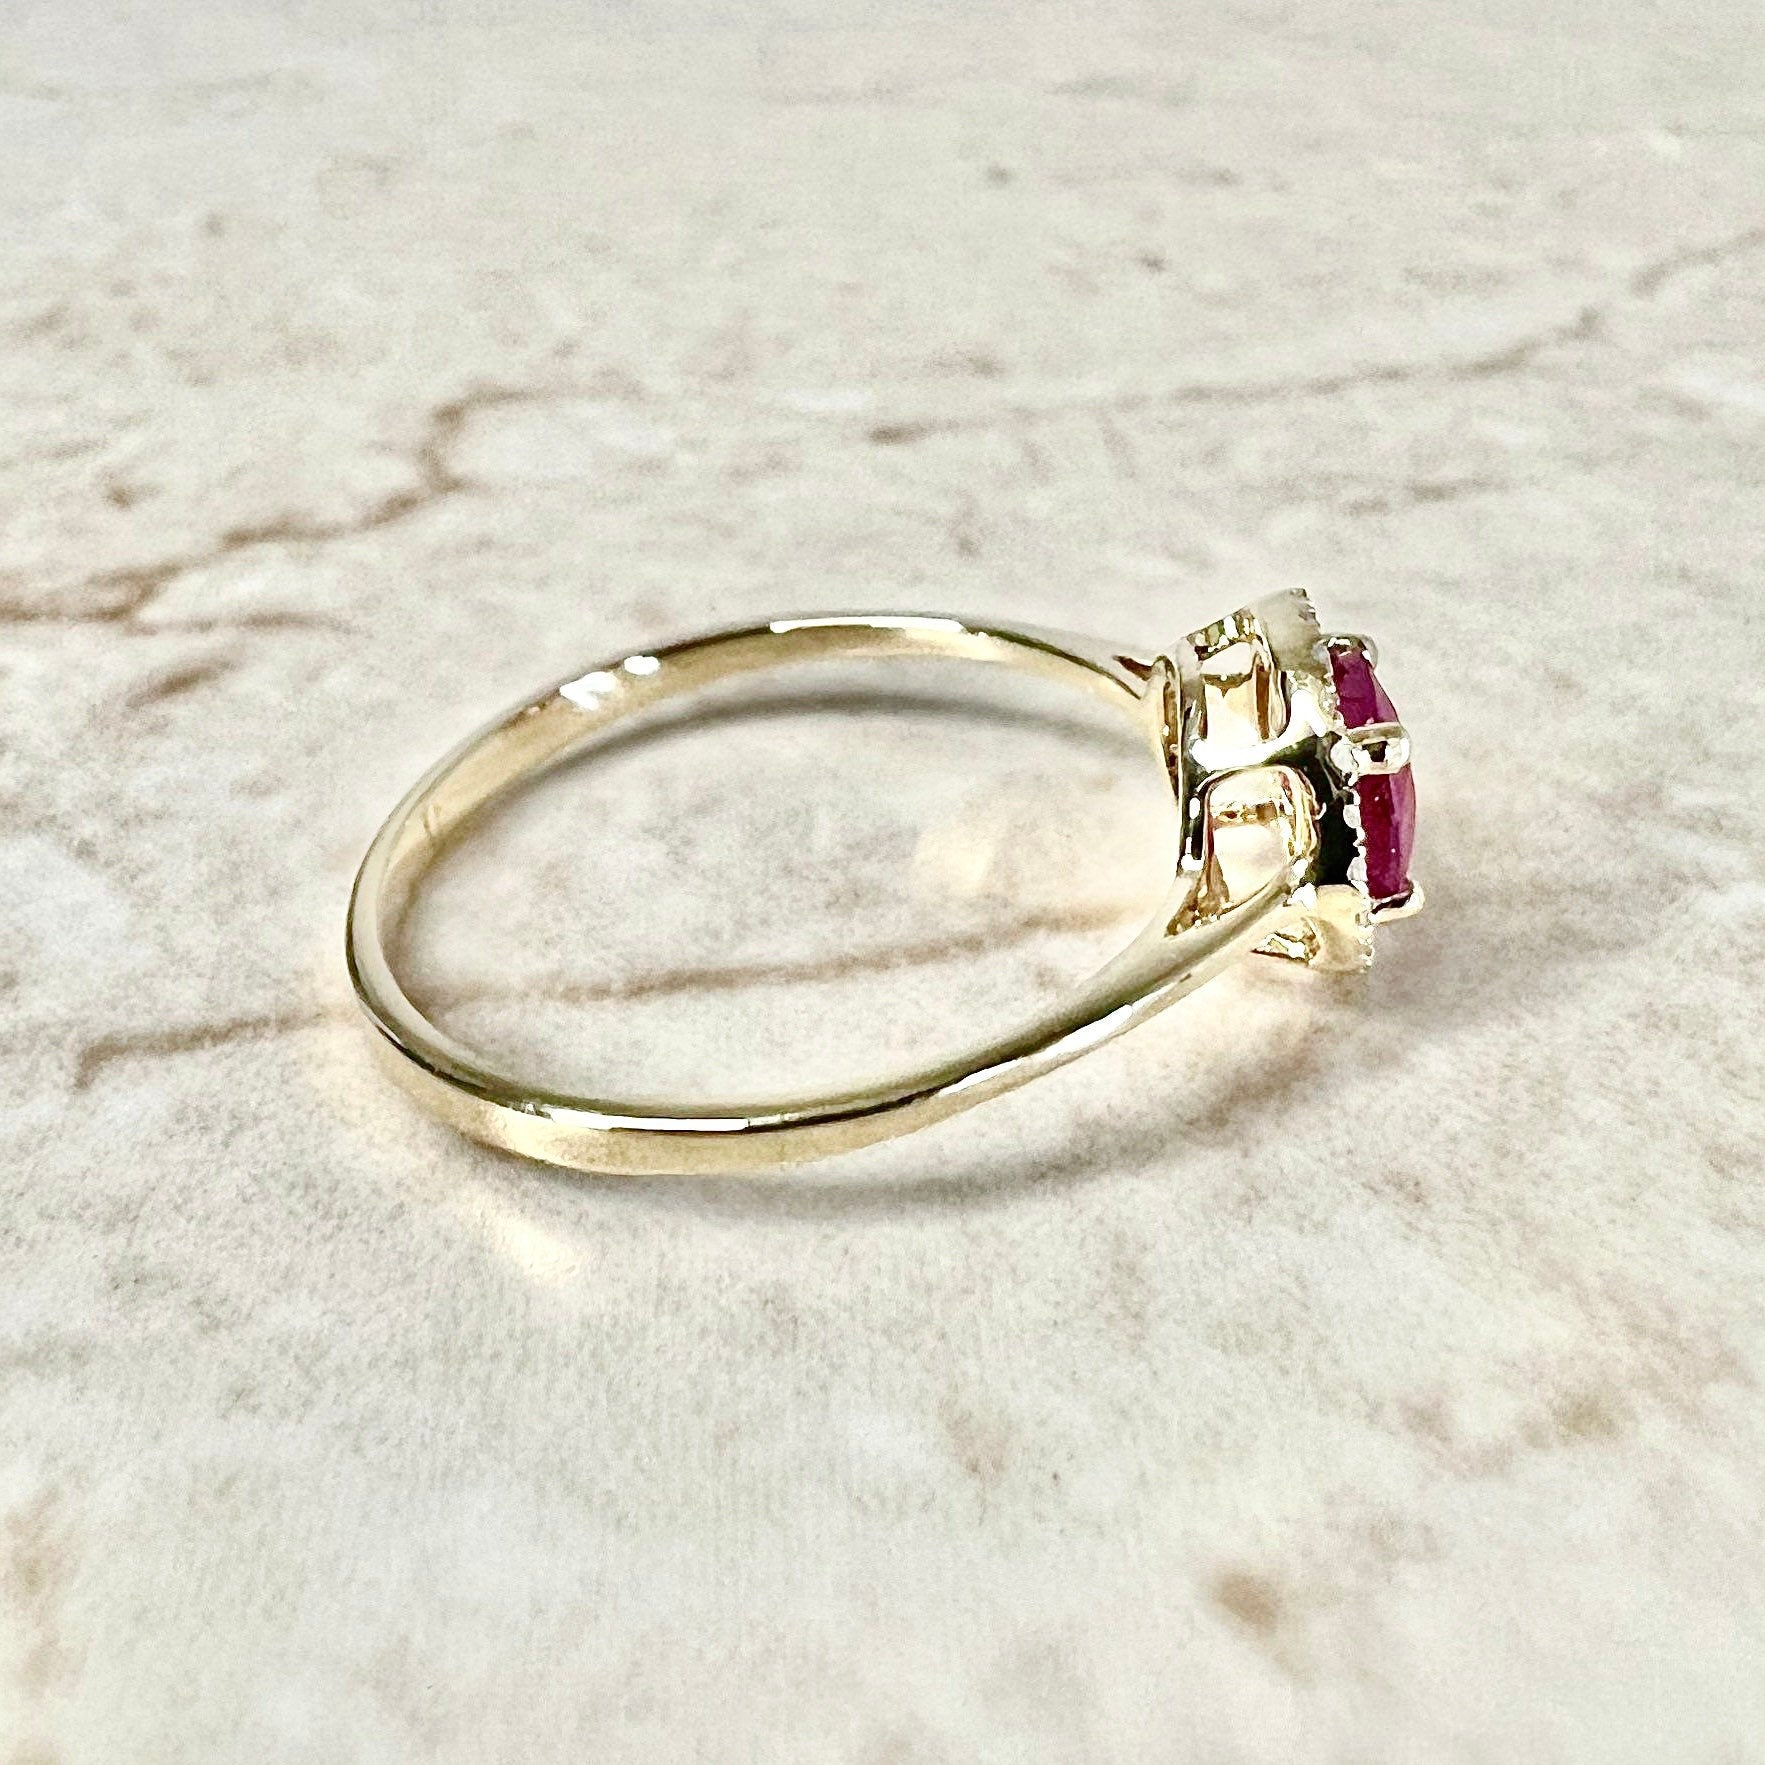 14K Round Ruby Halo Ring - Yellow Gold Ruby Ring - Natural Ruby Ring - Gemstone Halo Ring - Ruby Promise Ring -July Birthstone Gifts For Her